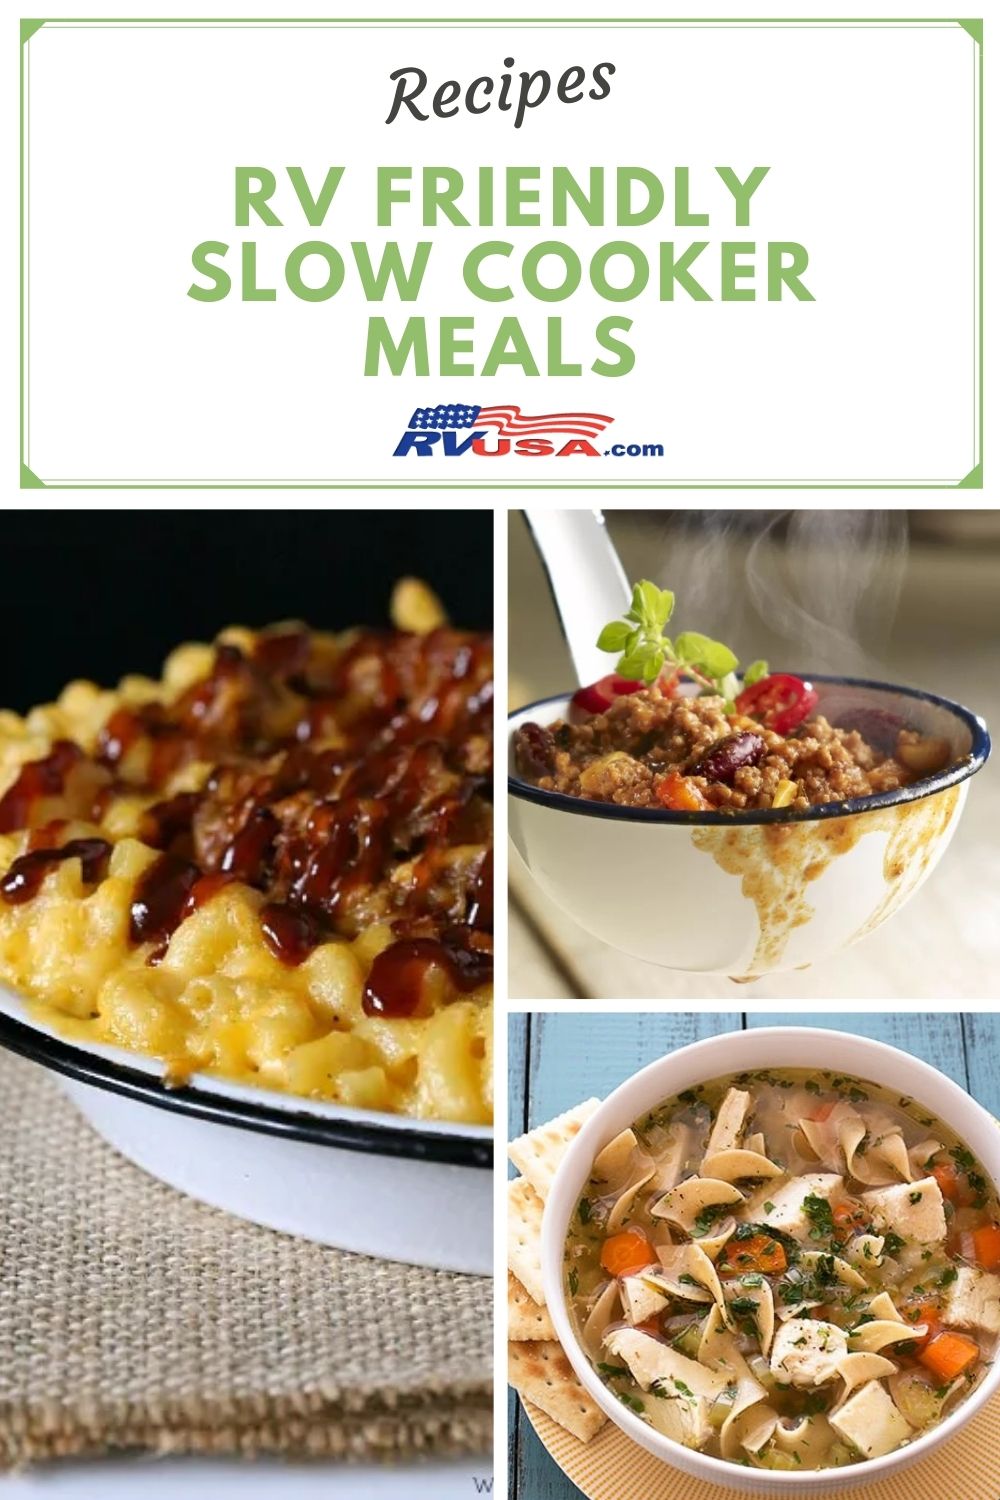 RV Friendly Slow Cooker Recipes